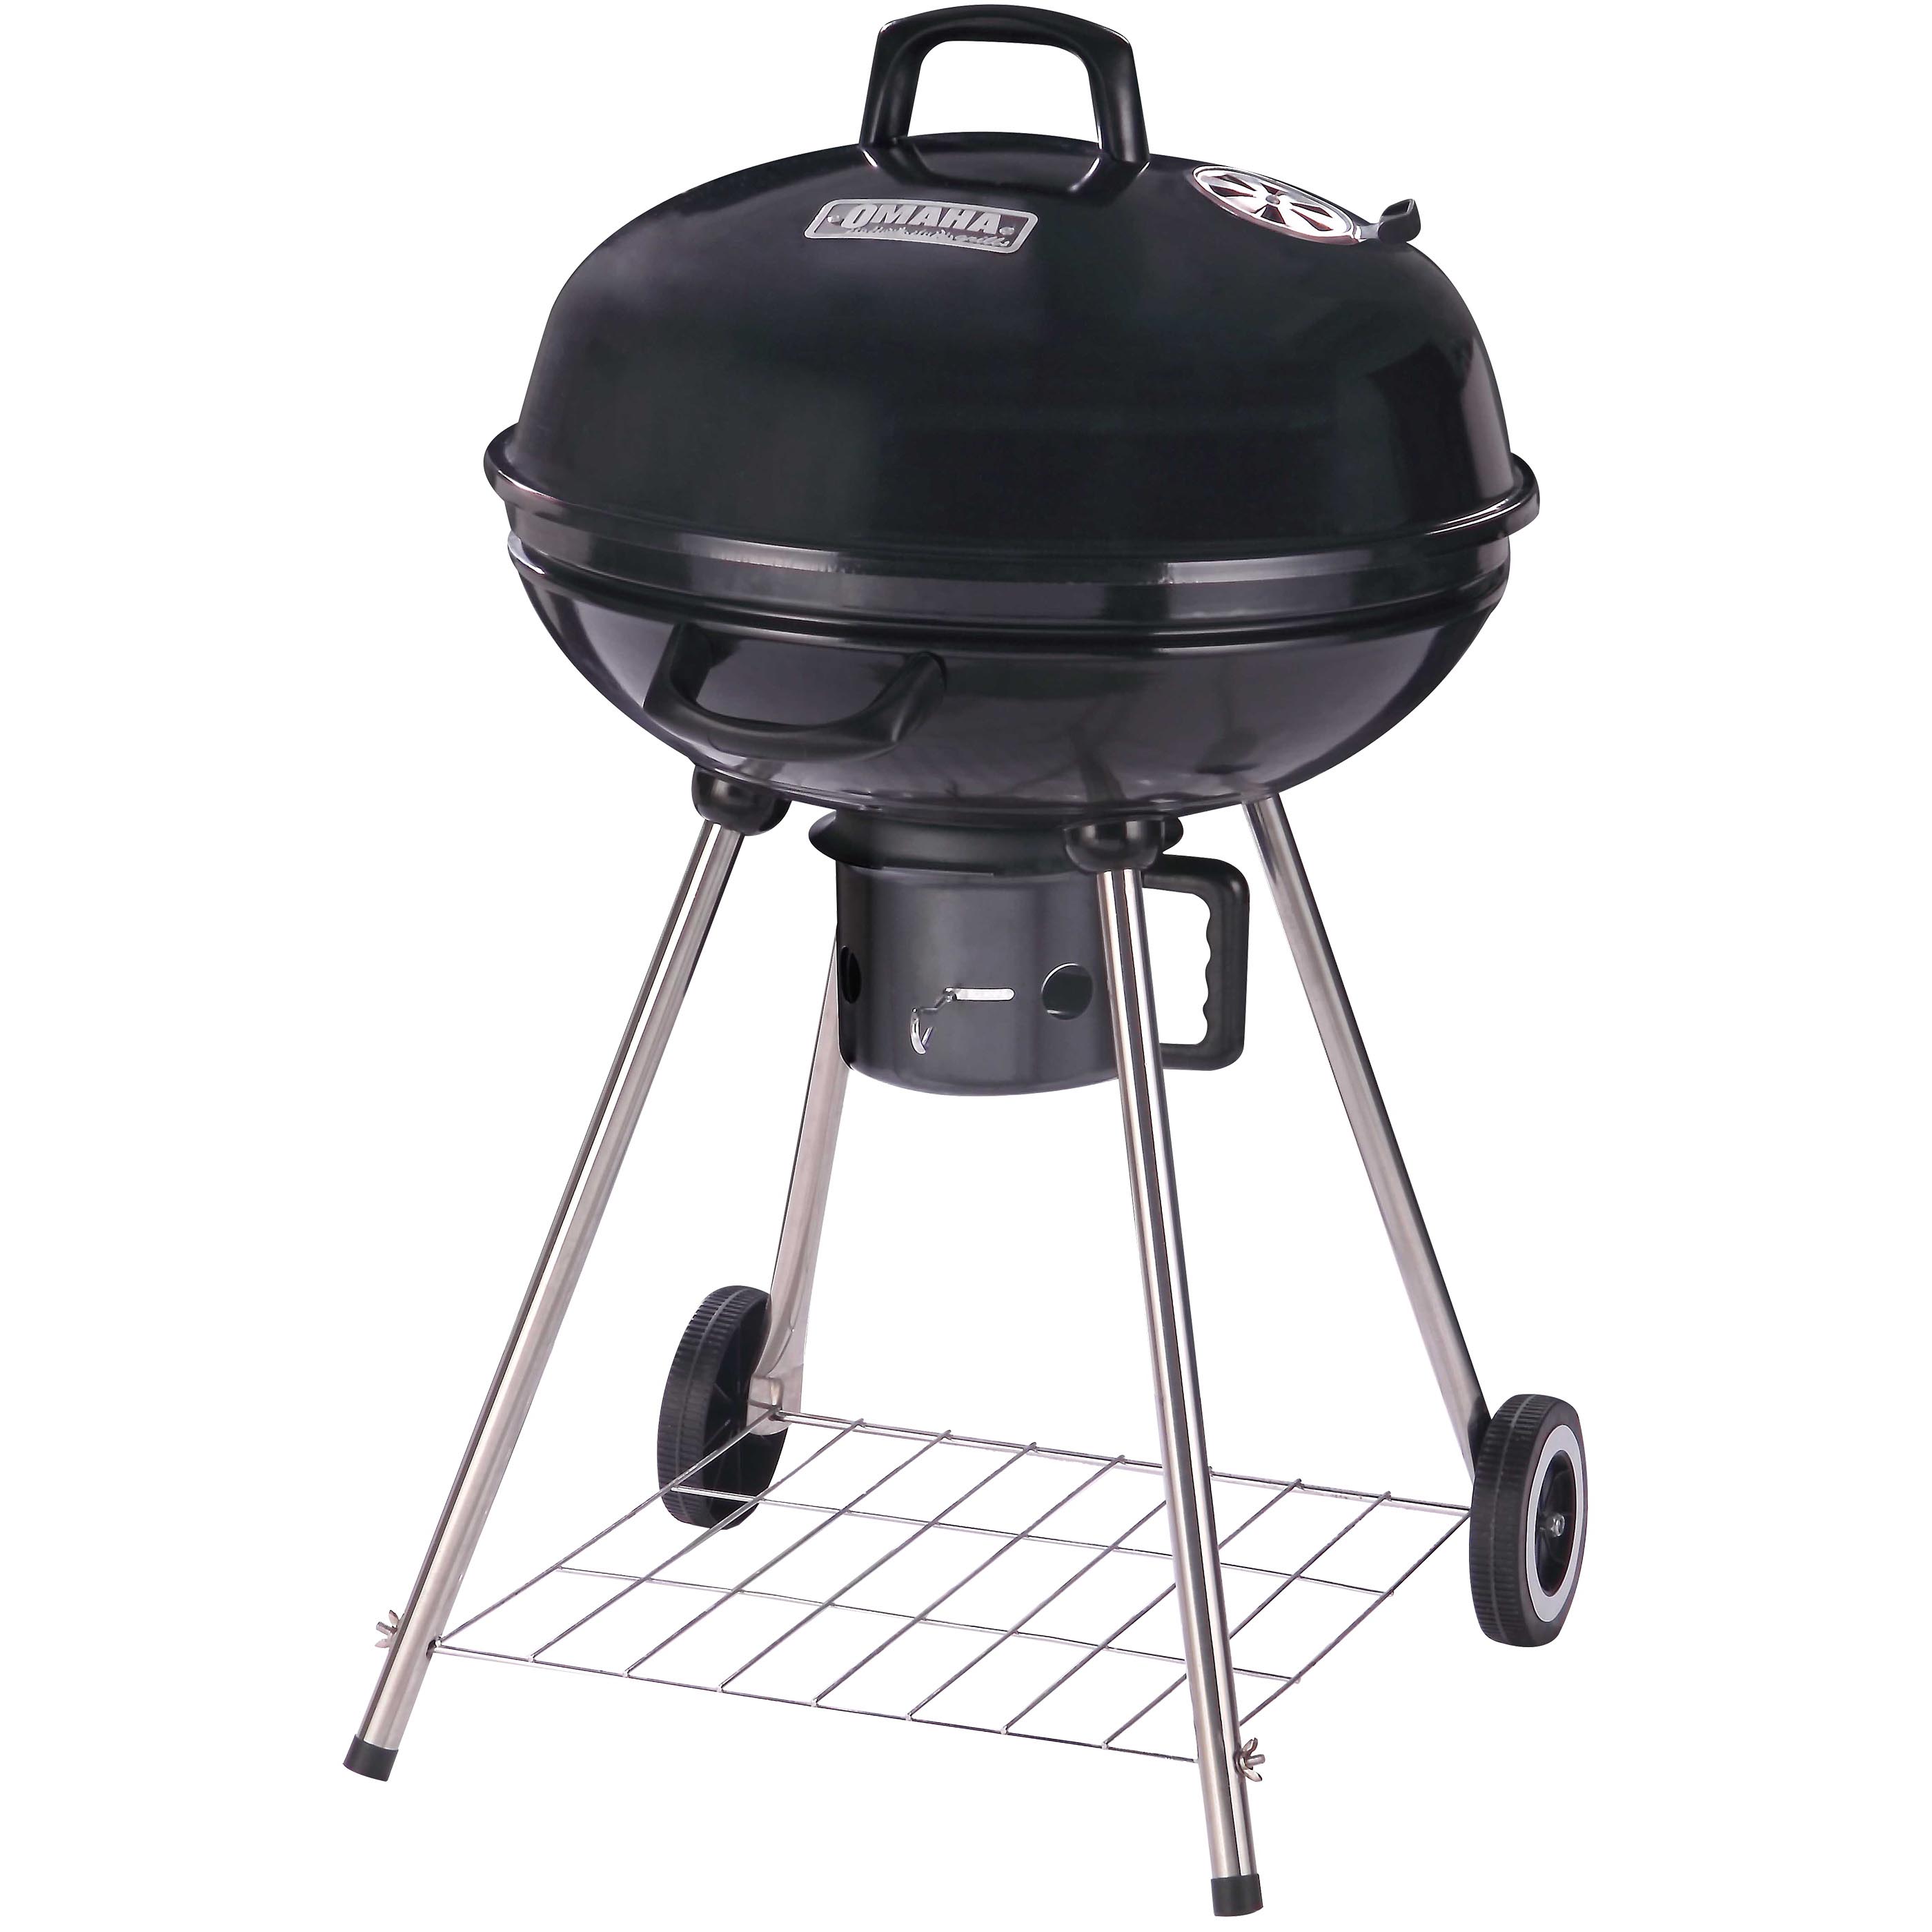 DFKP22443L Charcoal Kettle Grill, 2 -Grate, 397 sq-in Primary Cooking Surface, Black, Steel Body